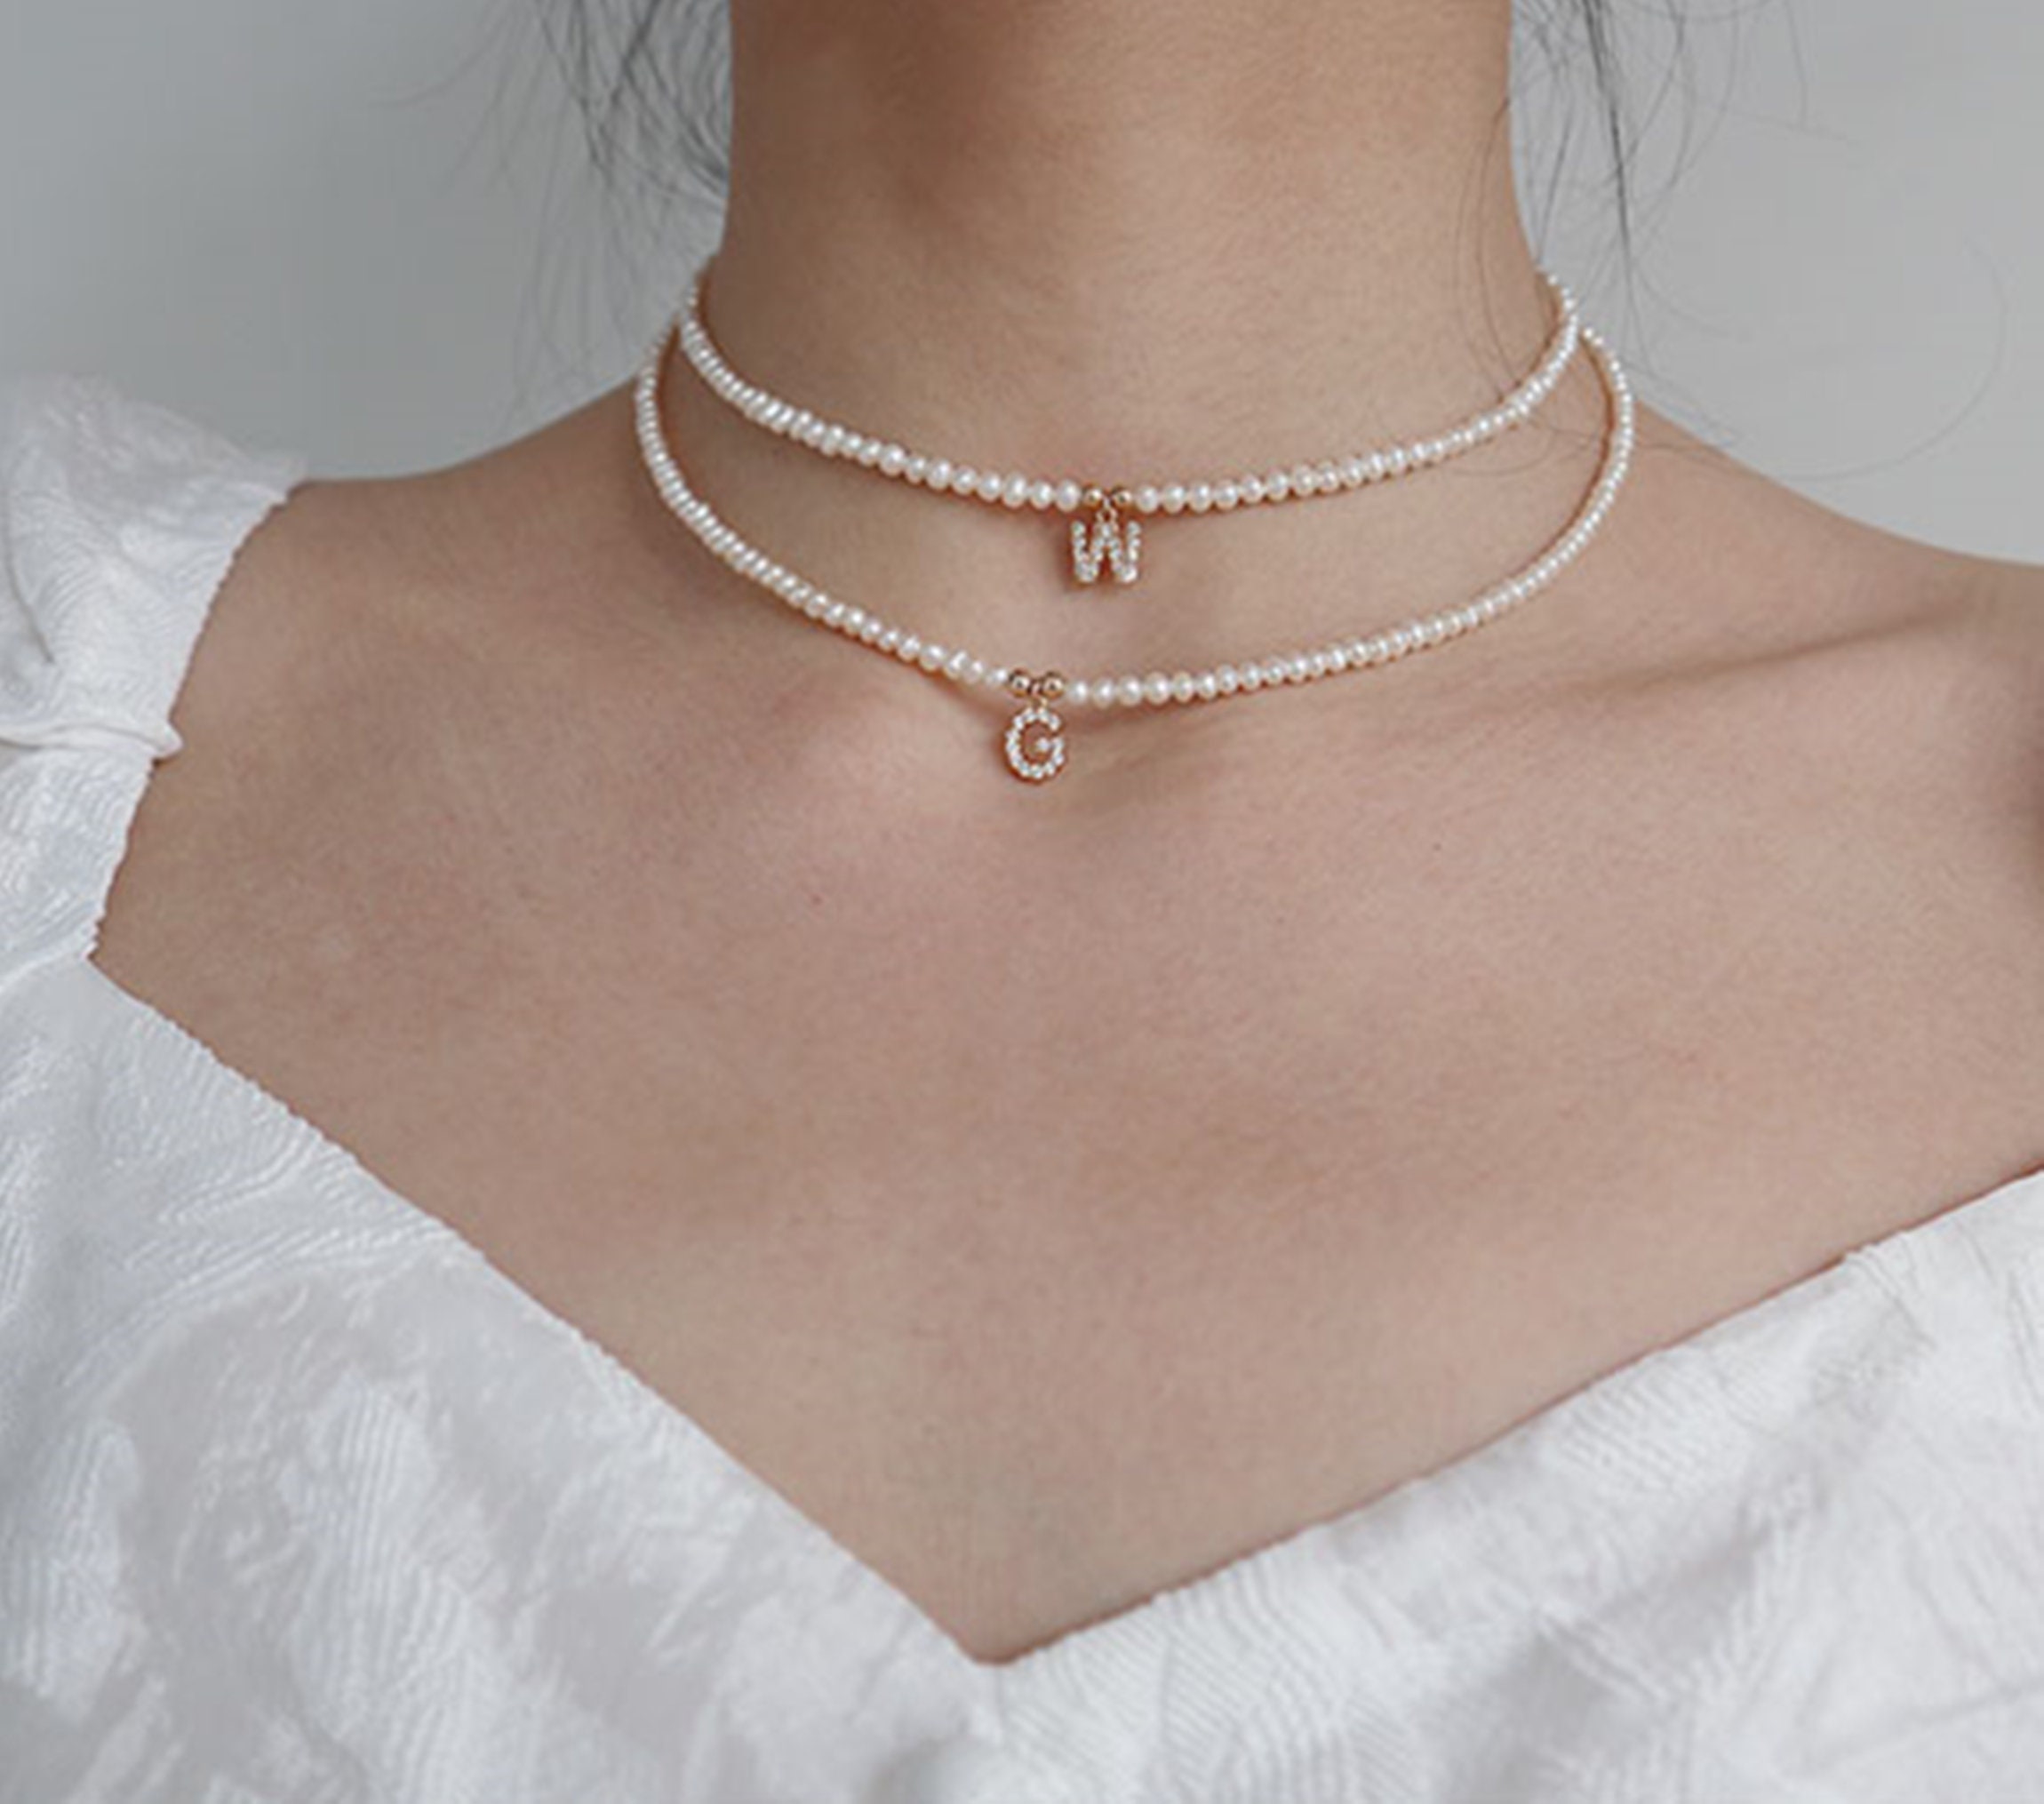 Chanel Limited Edition Necklace Karl Lagerfeld 2017 Pearl Choker